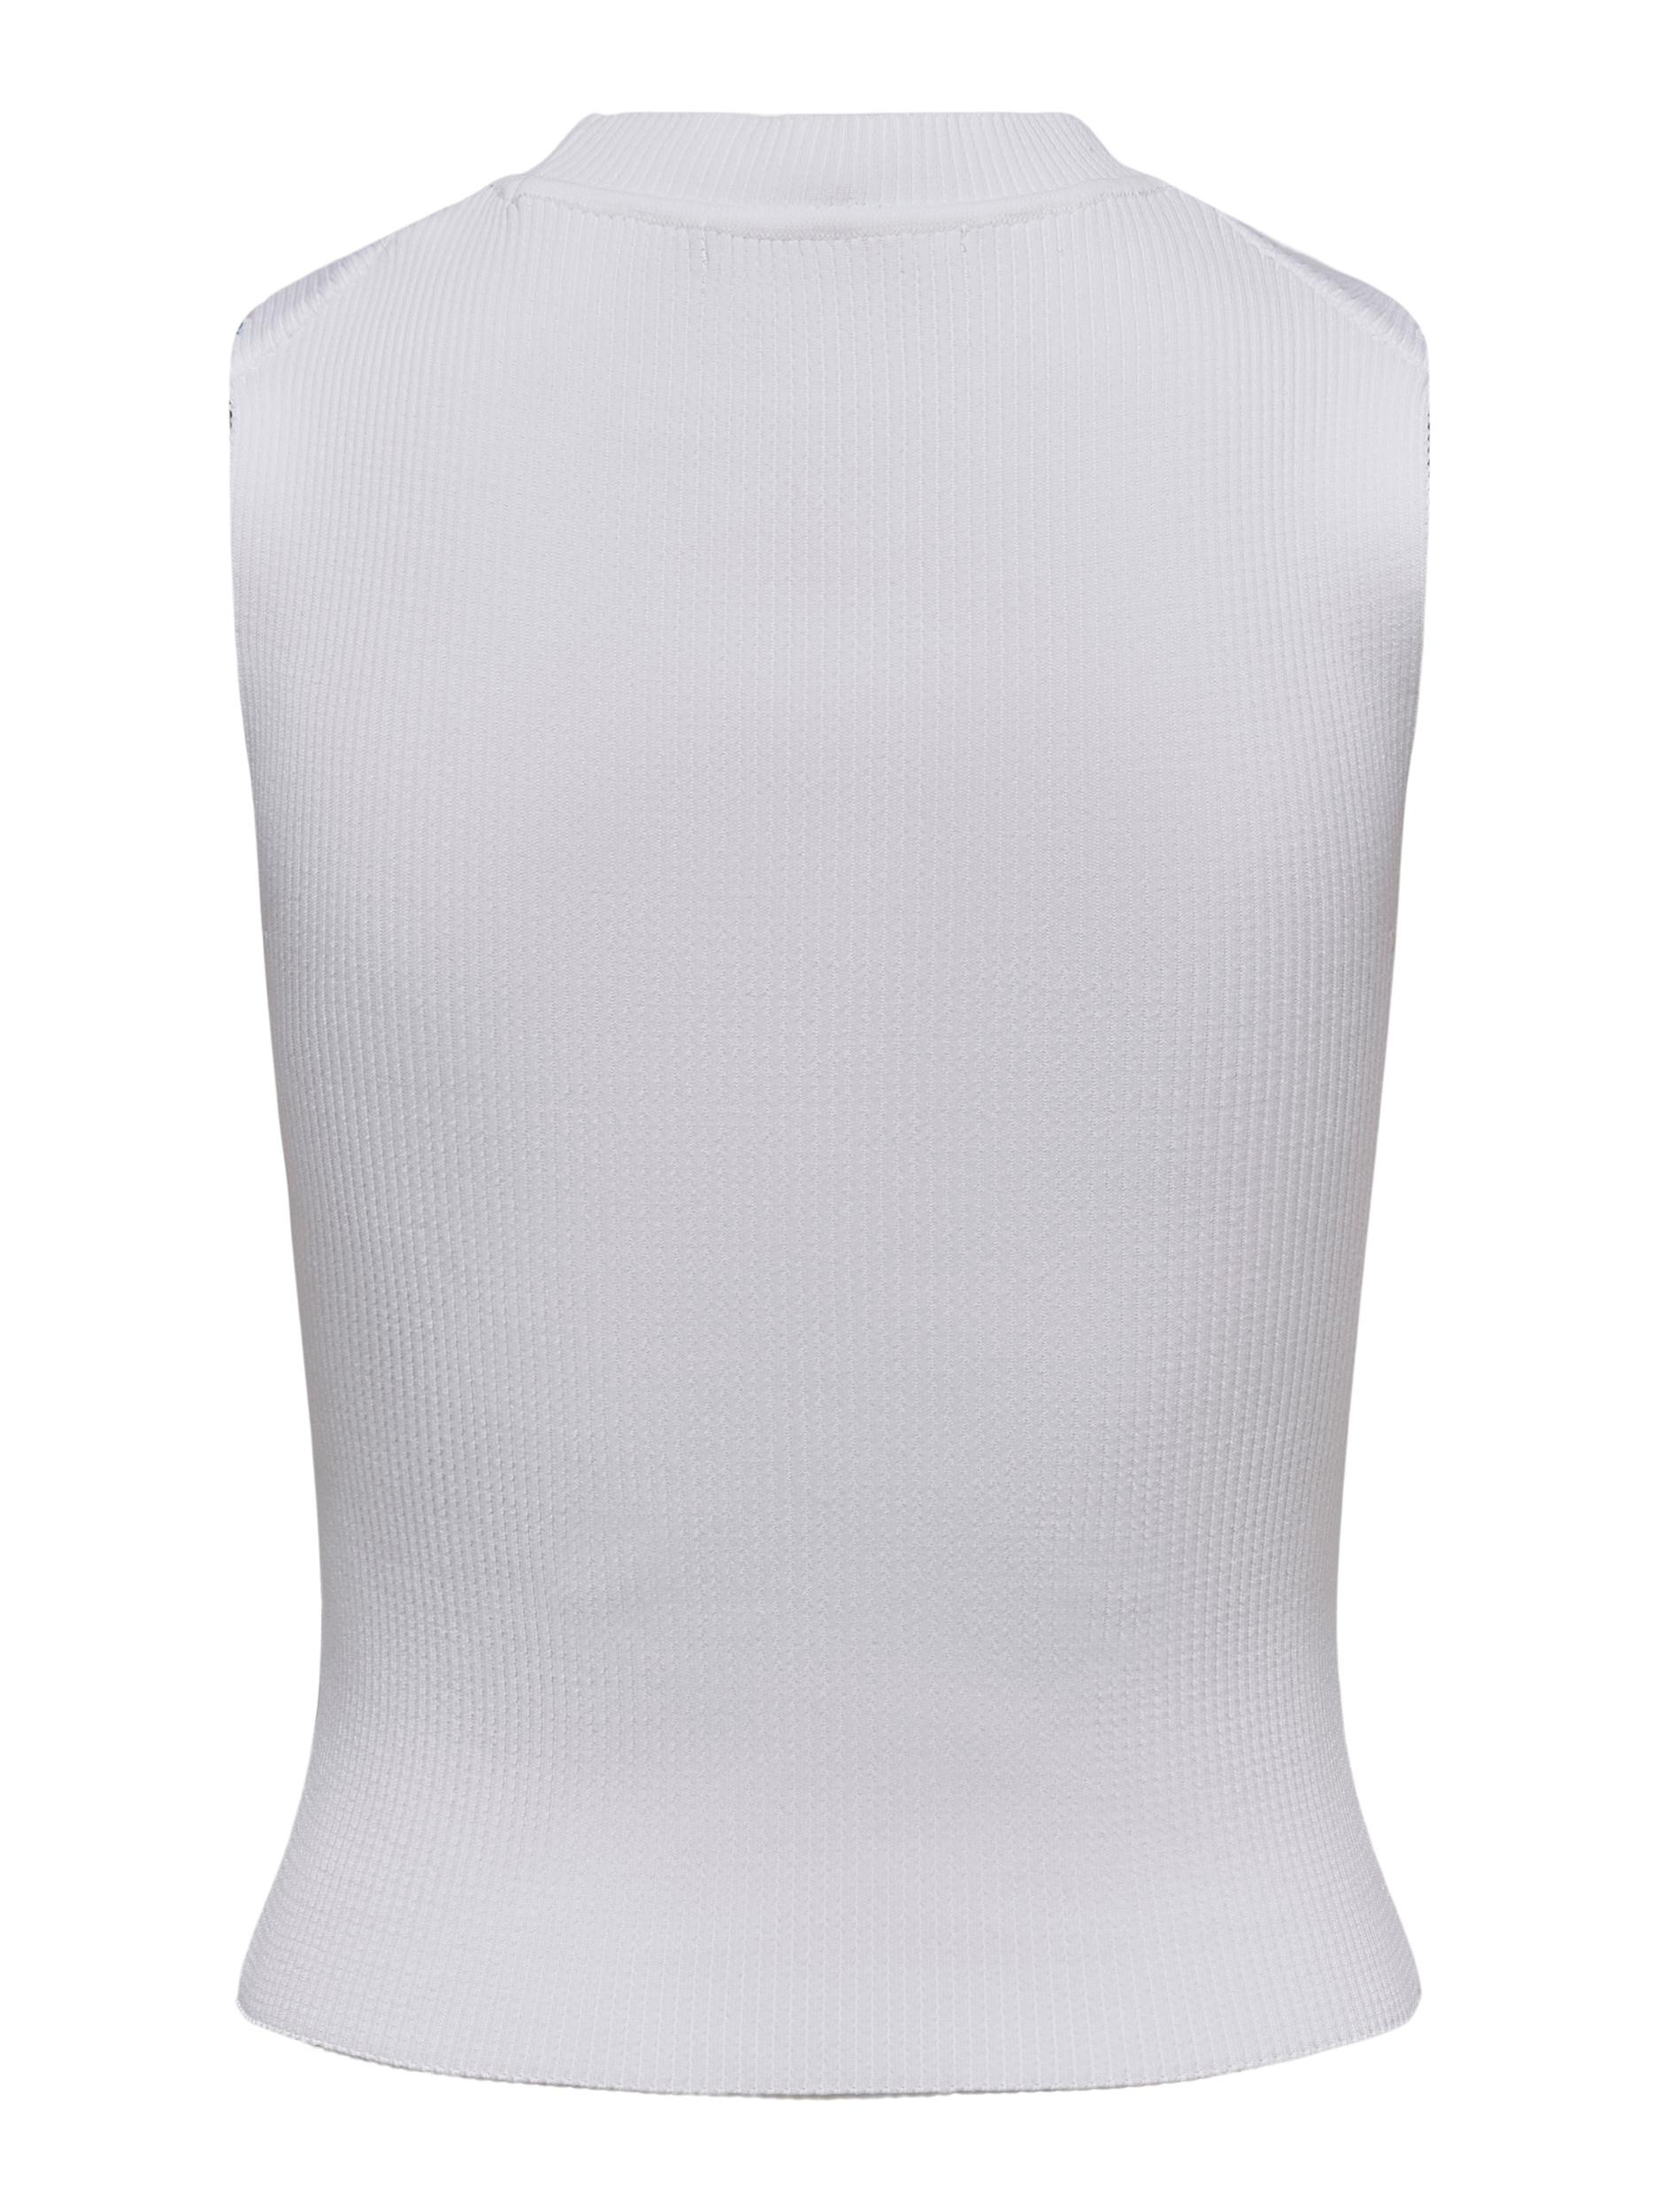 Only - Knitted top, White, large image number 1